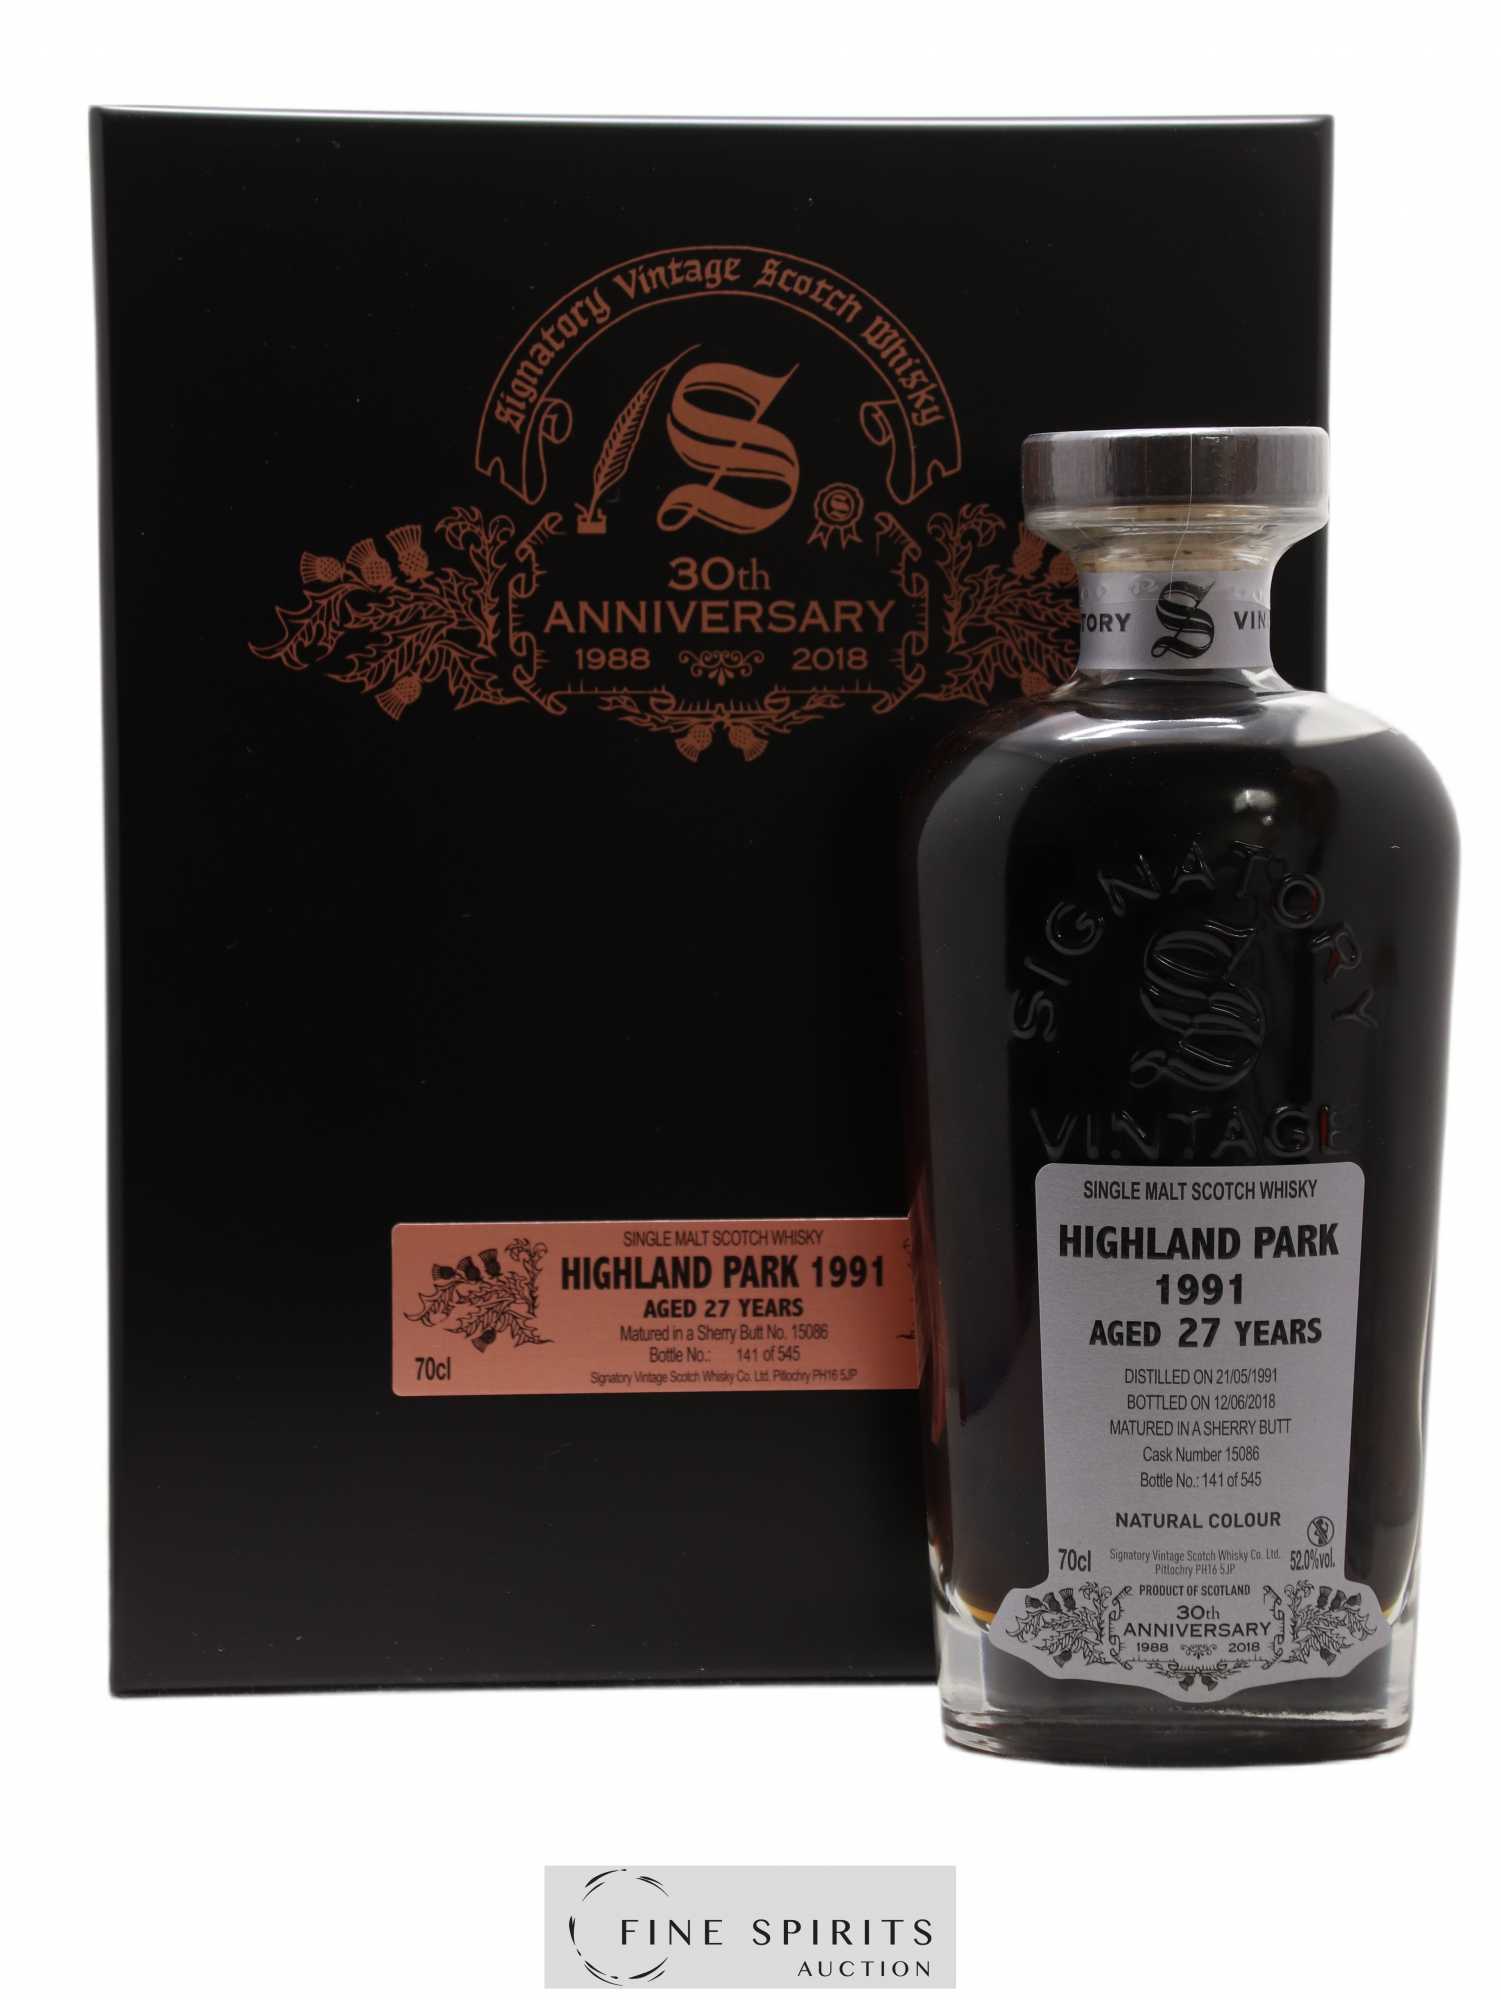 Highland Park 27 years 1991 Signatory Vintage Sherry But Cask n°15086 - One of 545 - bottled 2018 30th Anniversary 